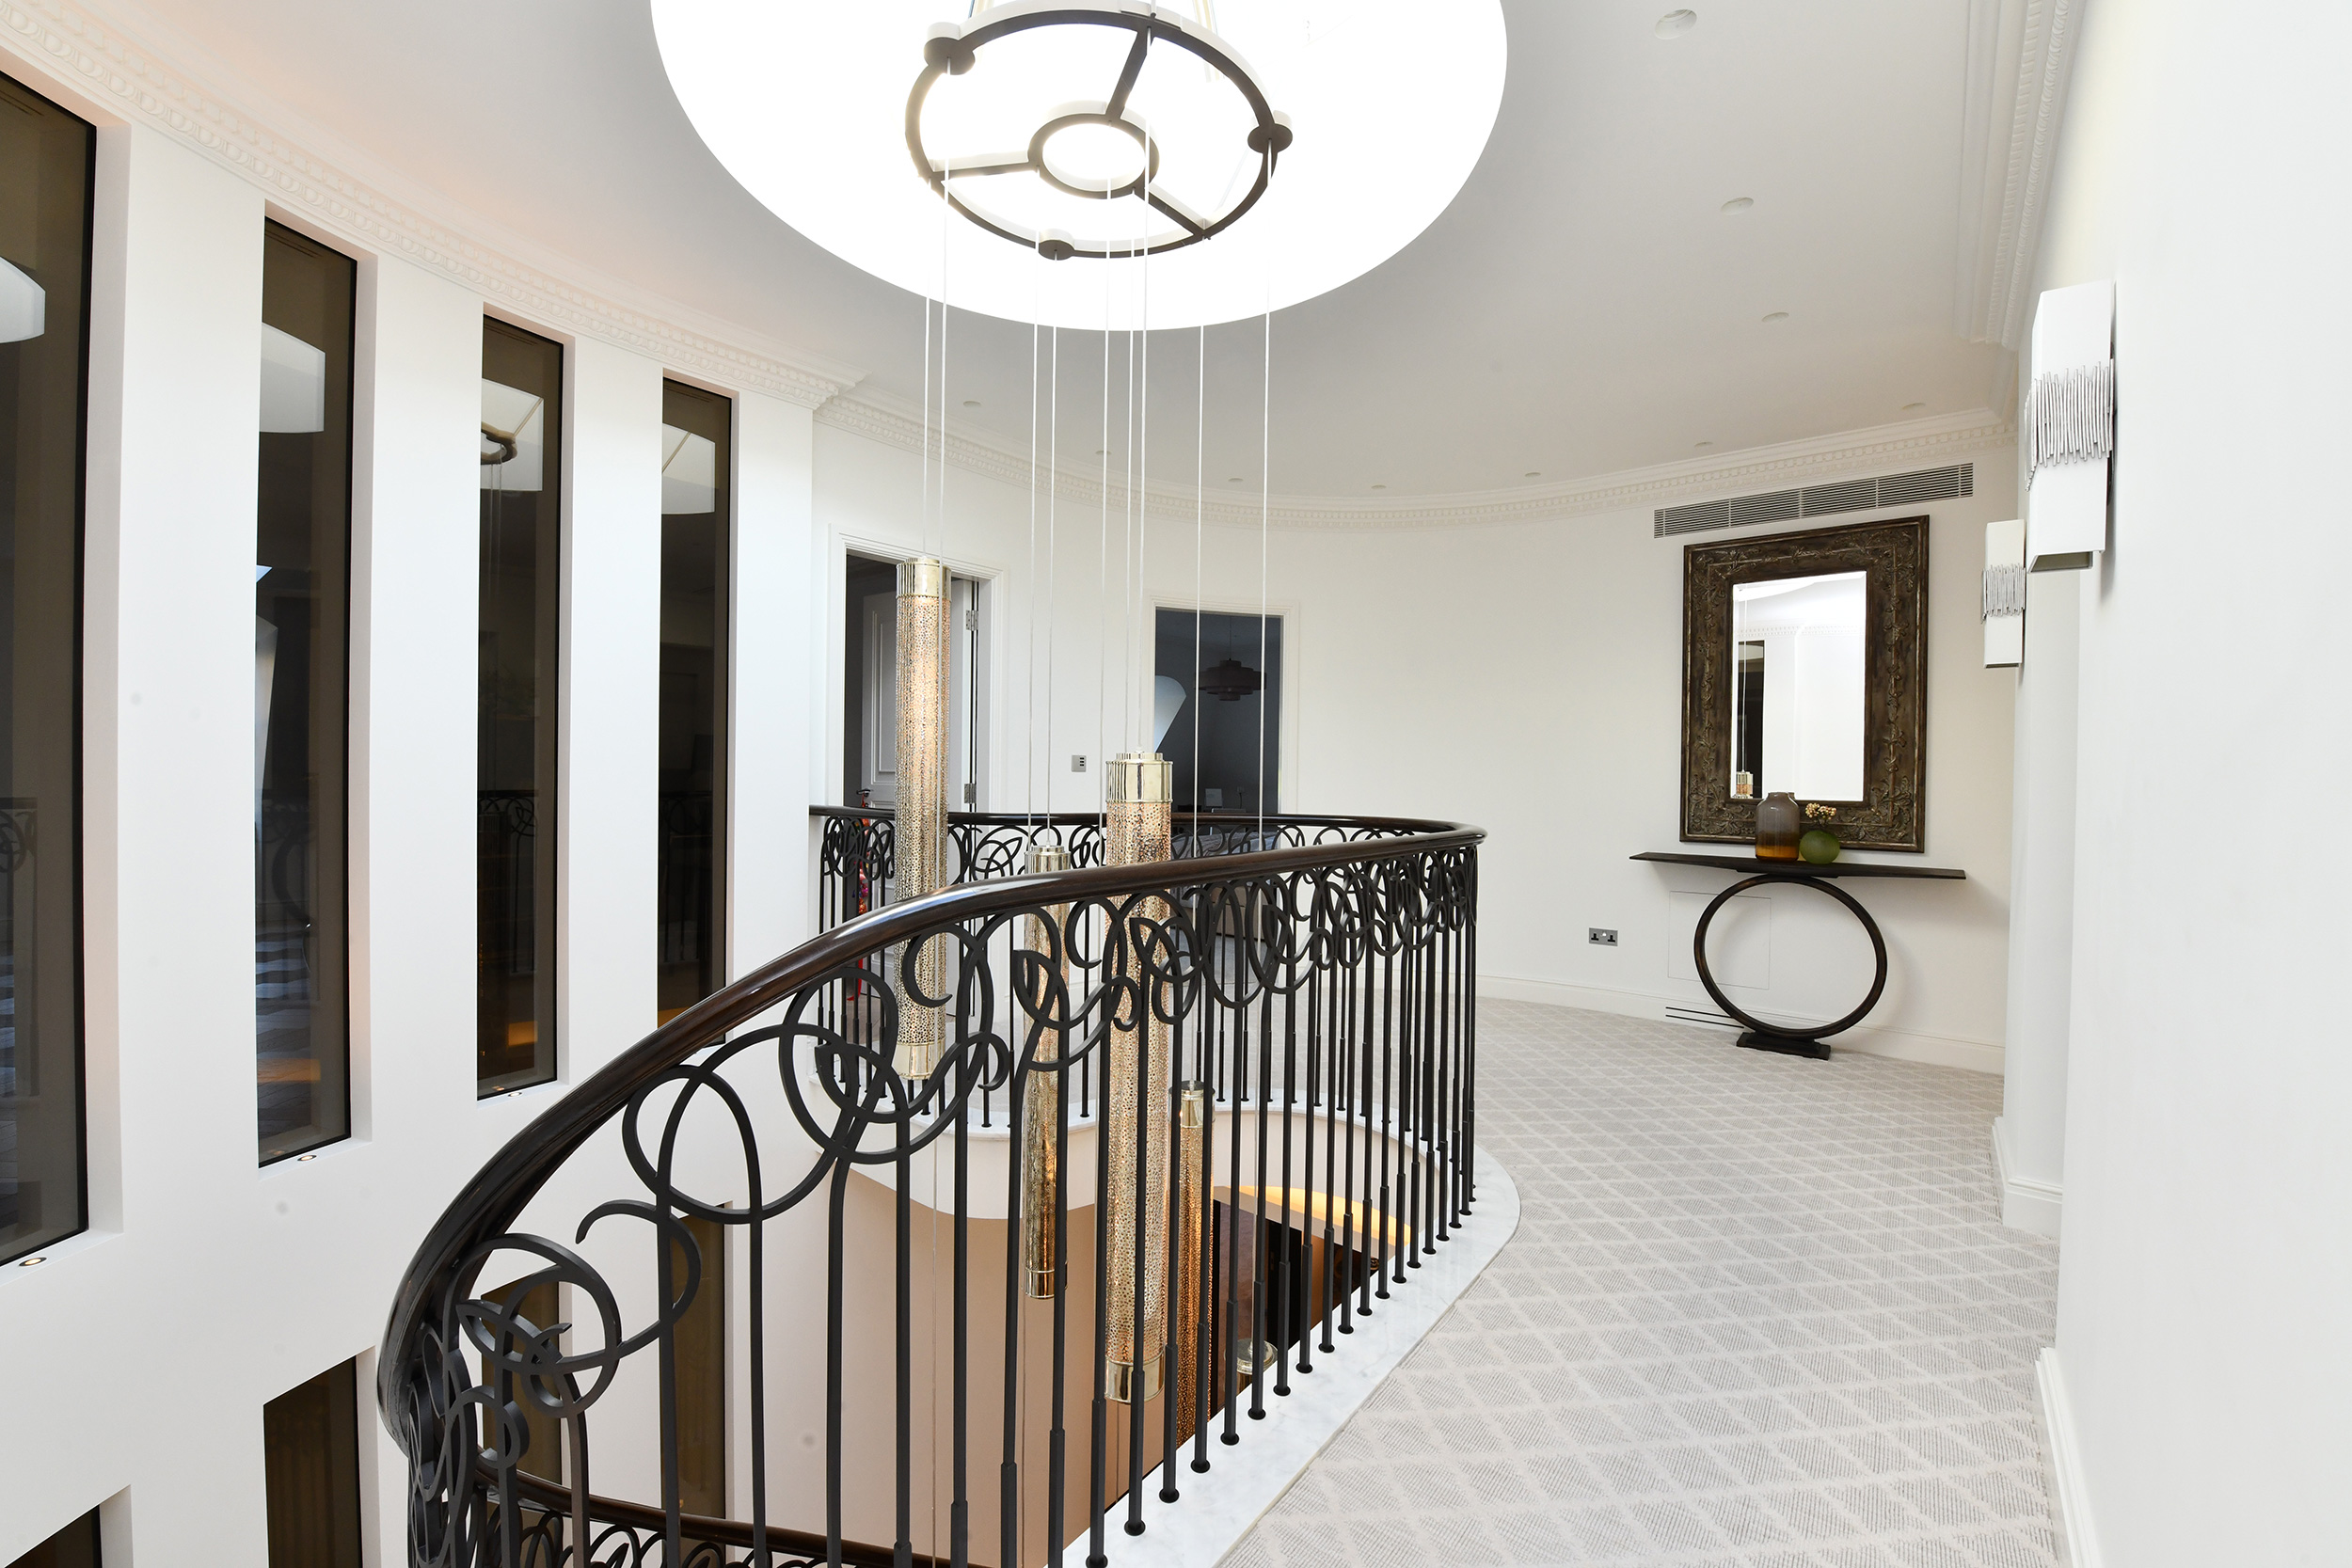 Bespoke lighting features throughout the home all controlled by Lutron lighting system